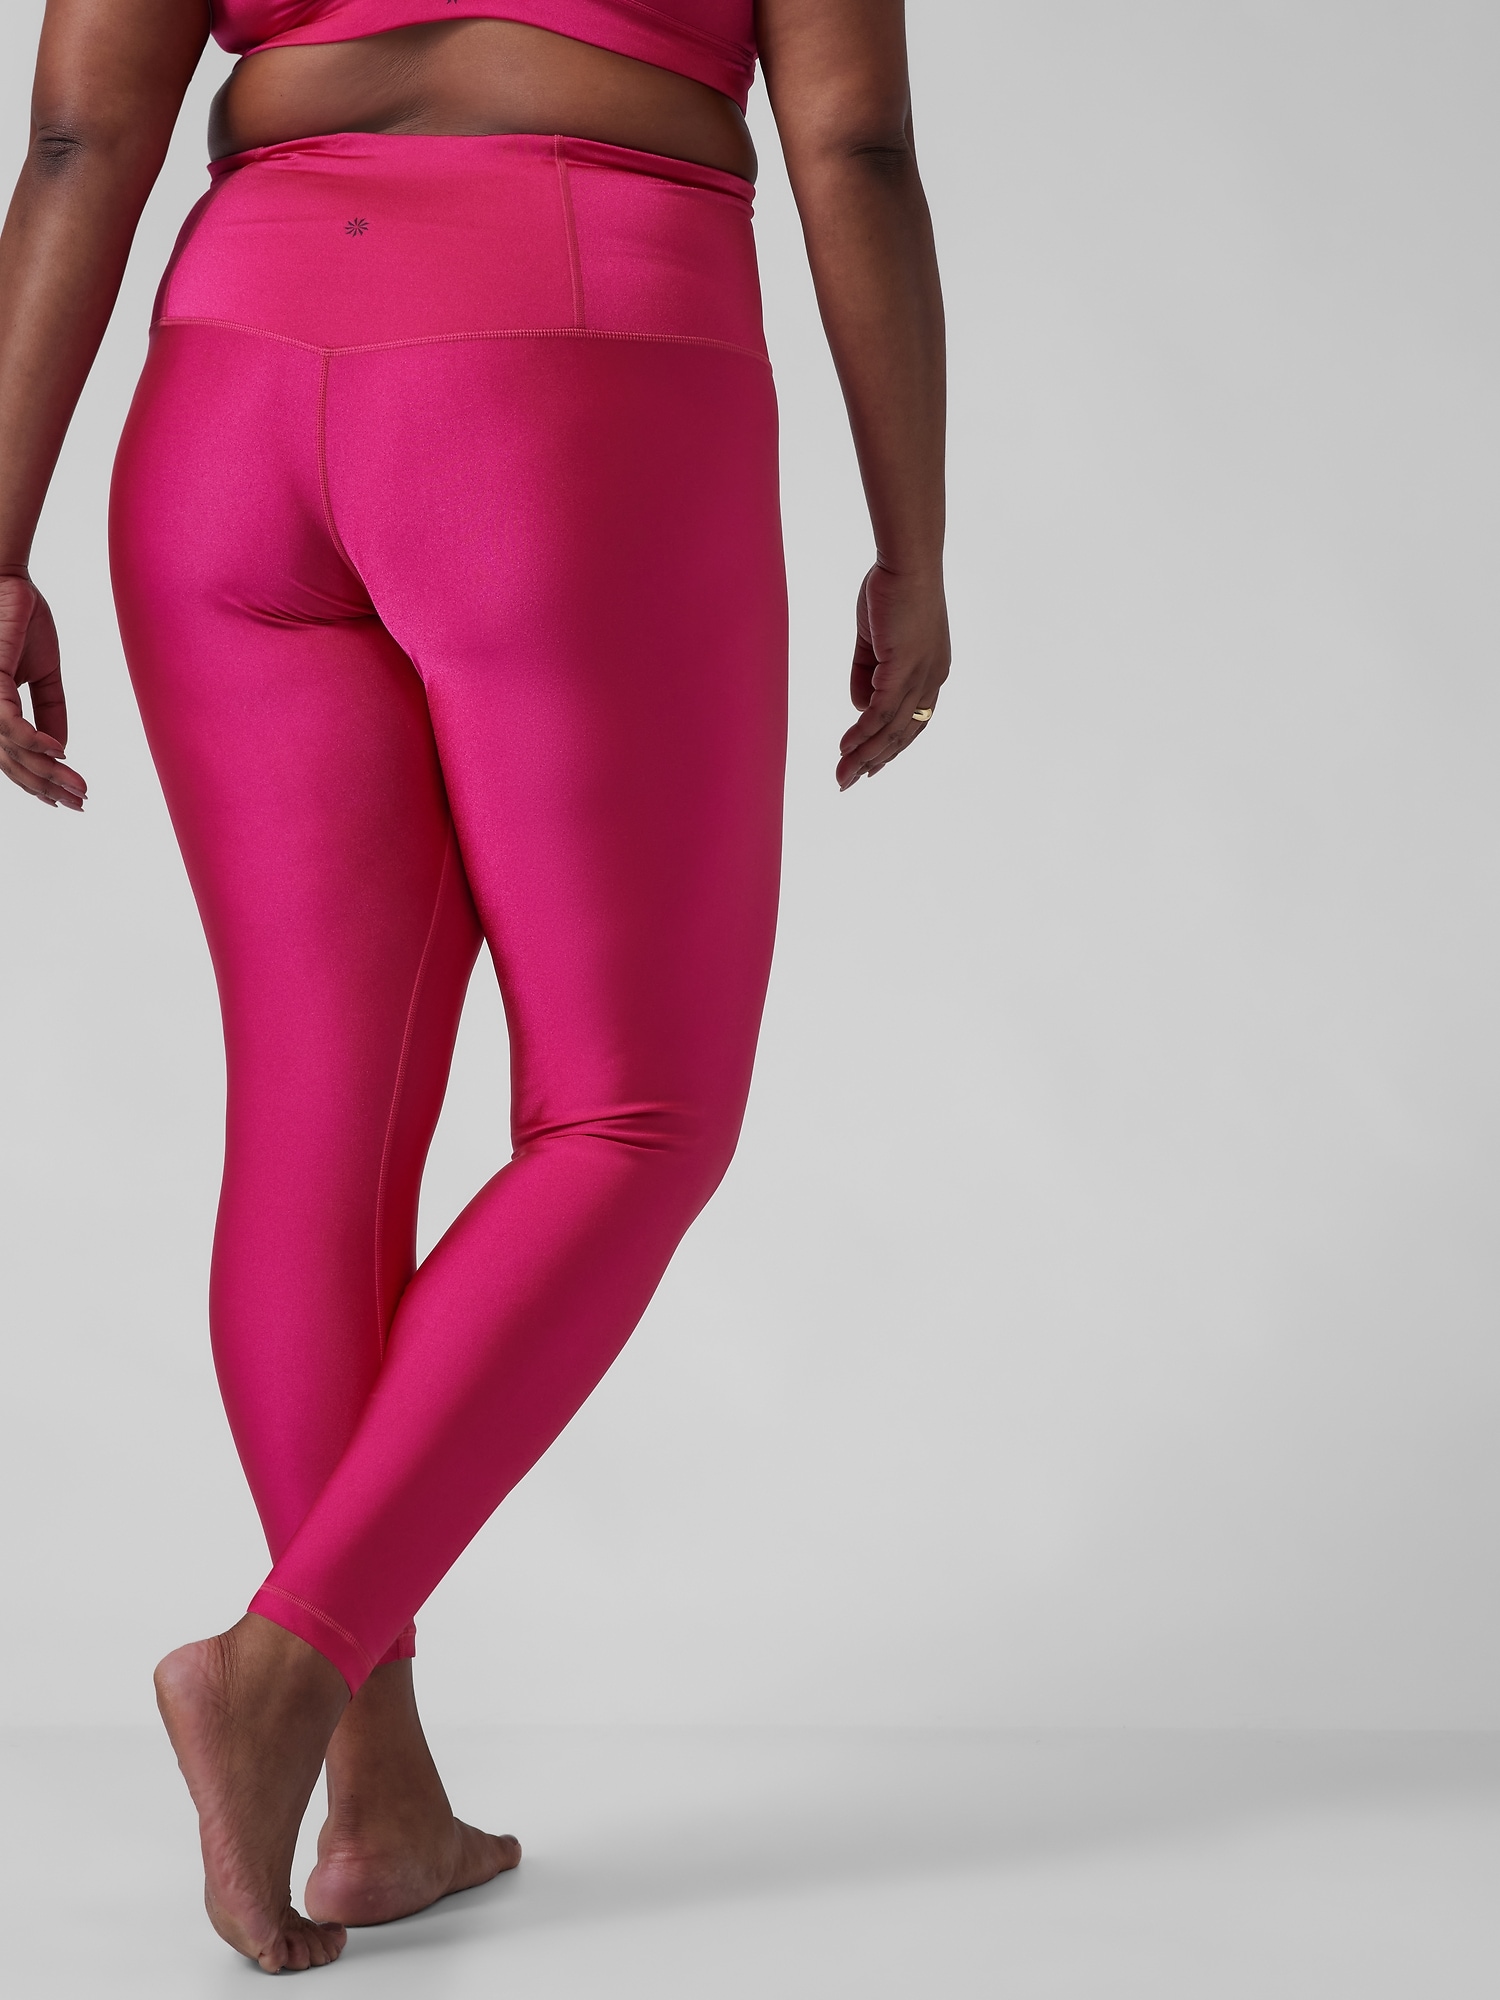 Athleta Inclination Moto Tight Leggings Orchid Pink High Waisted Athletic  XL